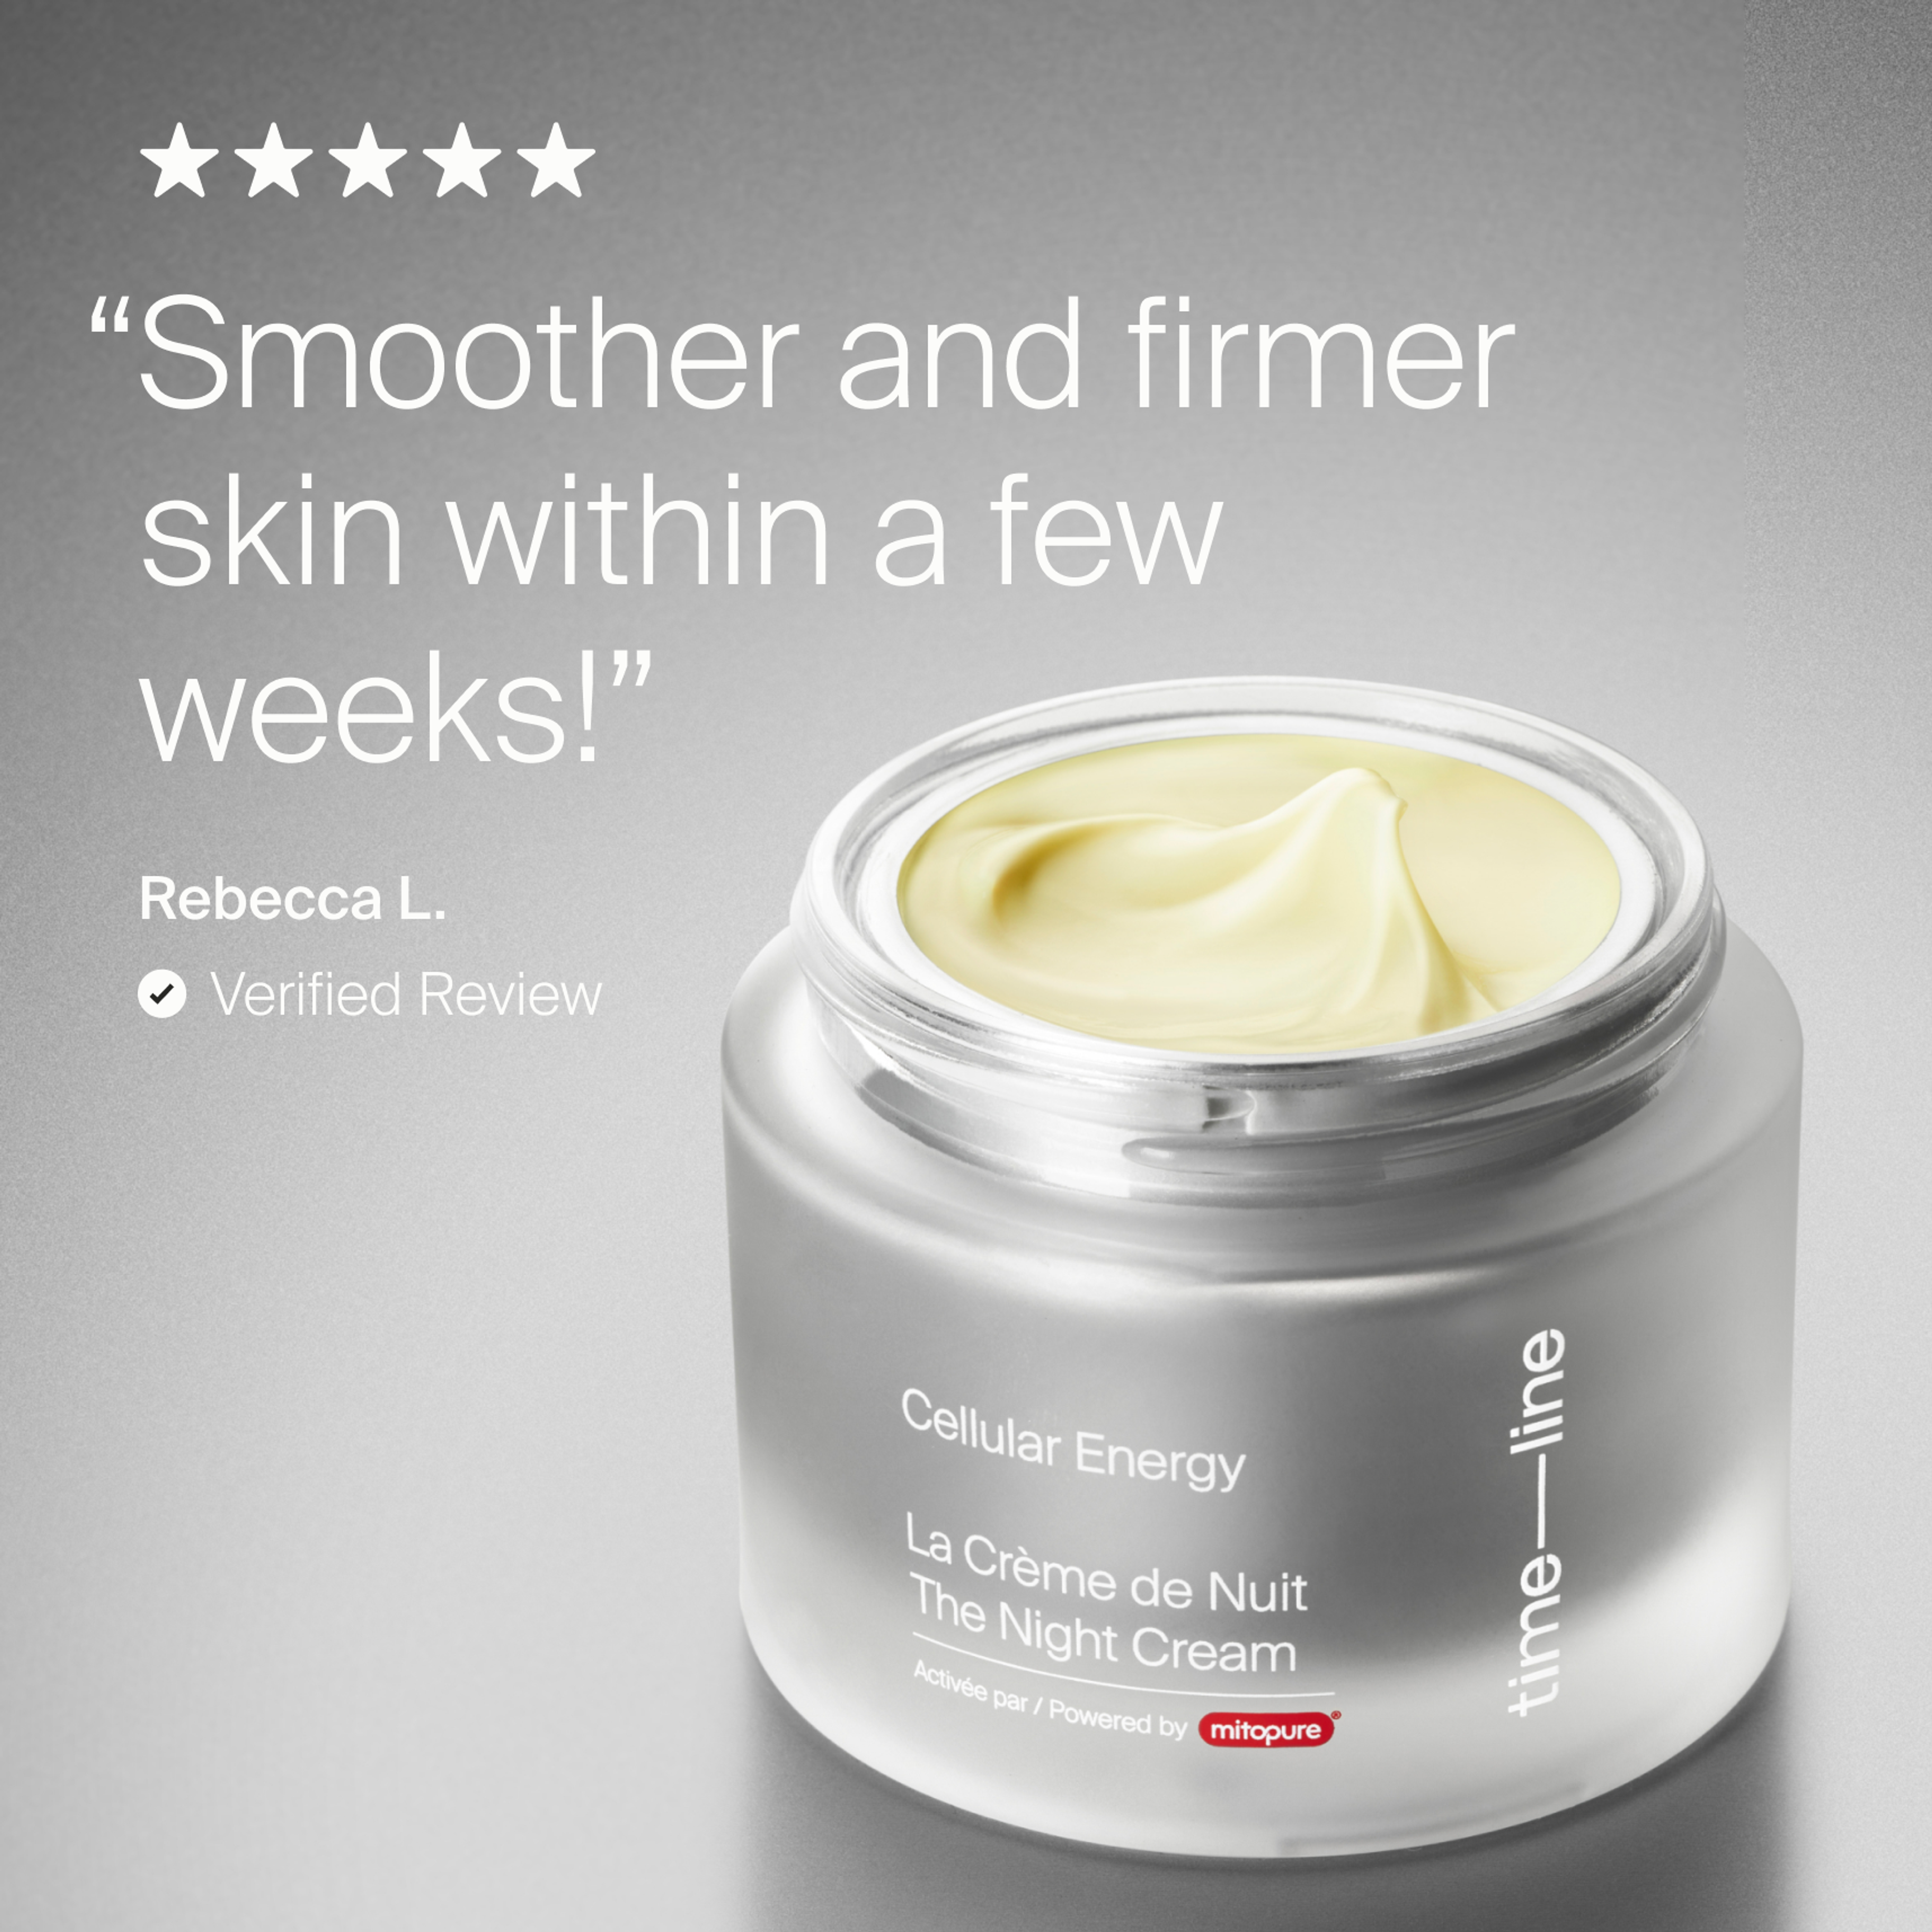 The Night Cream 7-Day Trial Kit